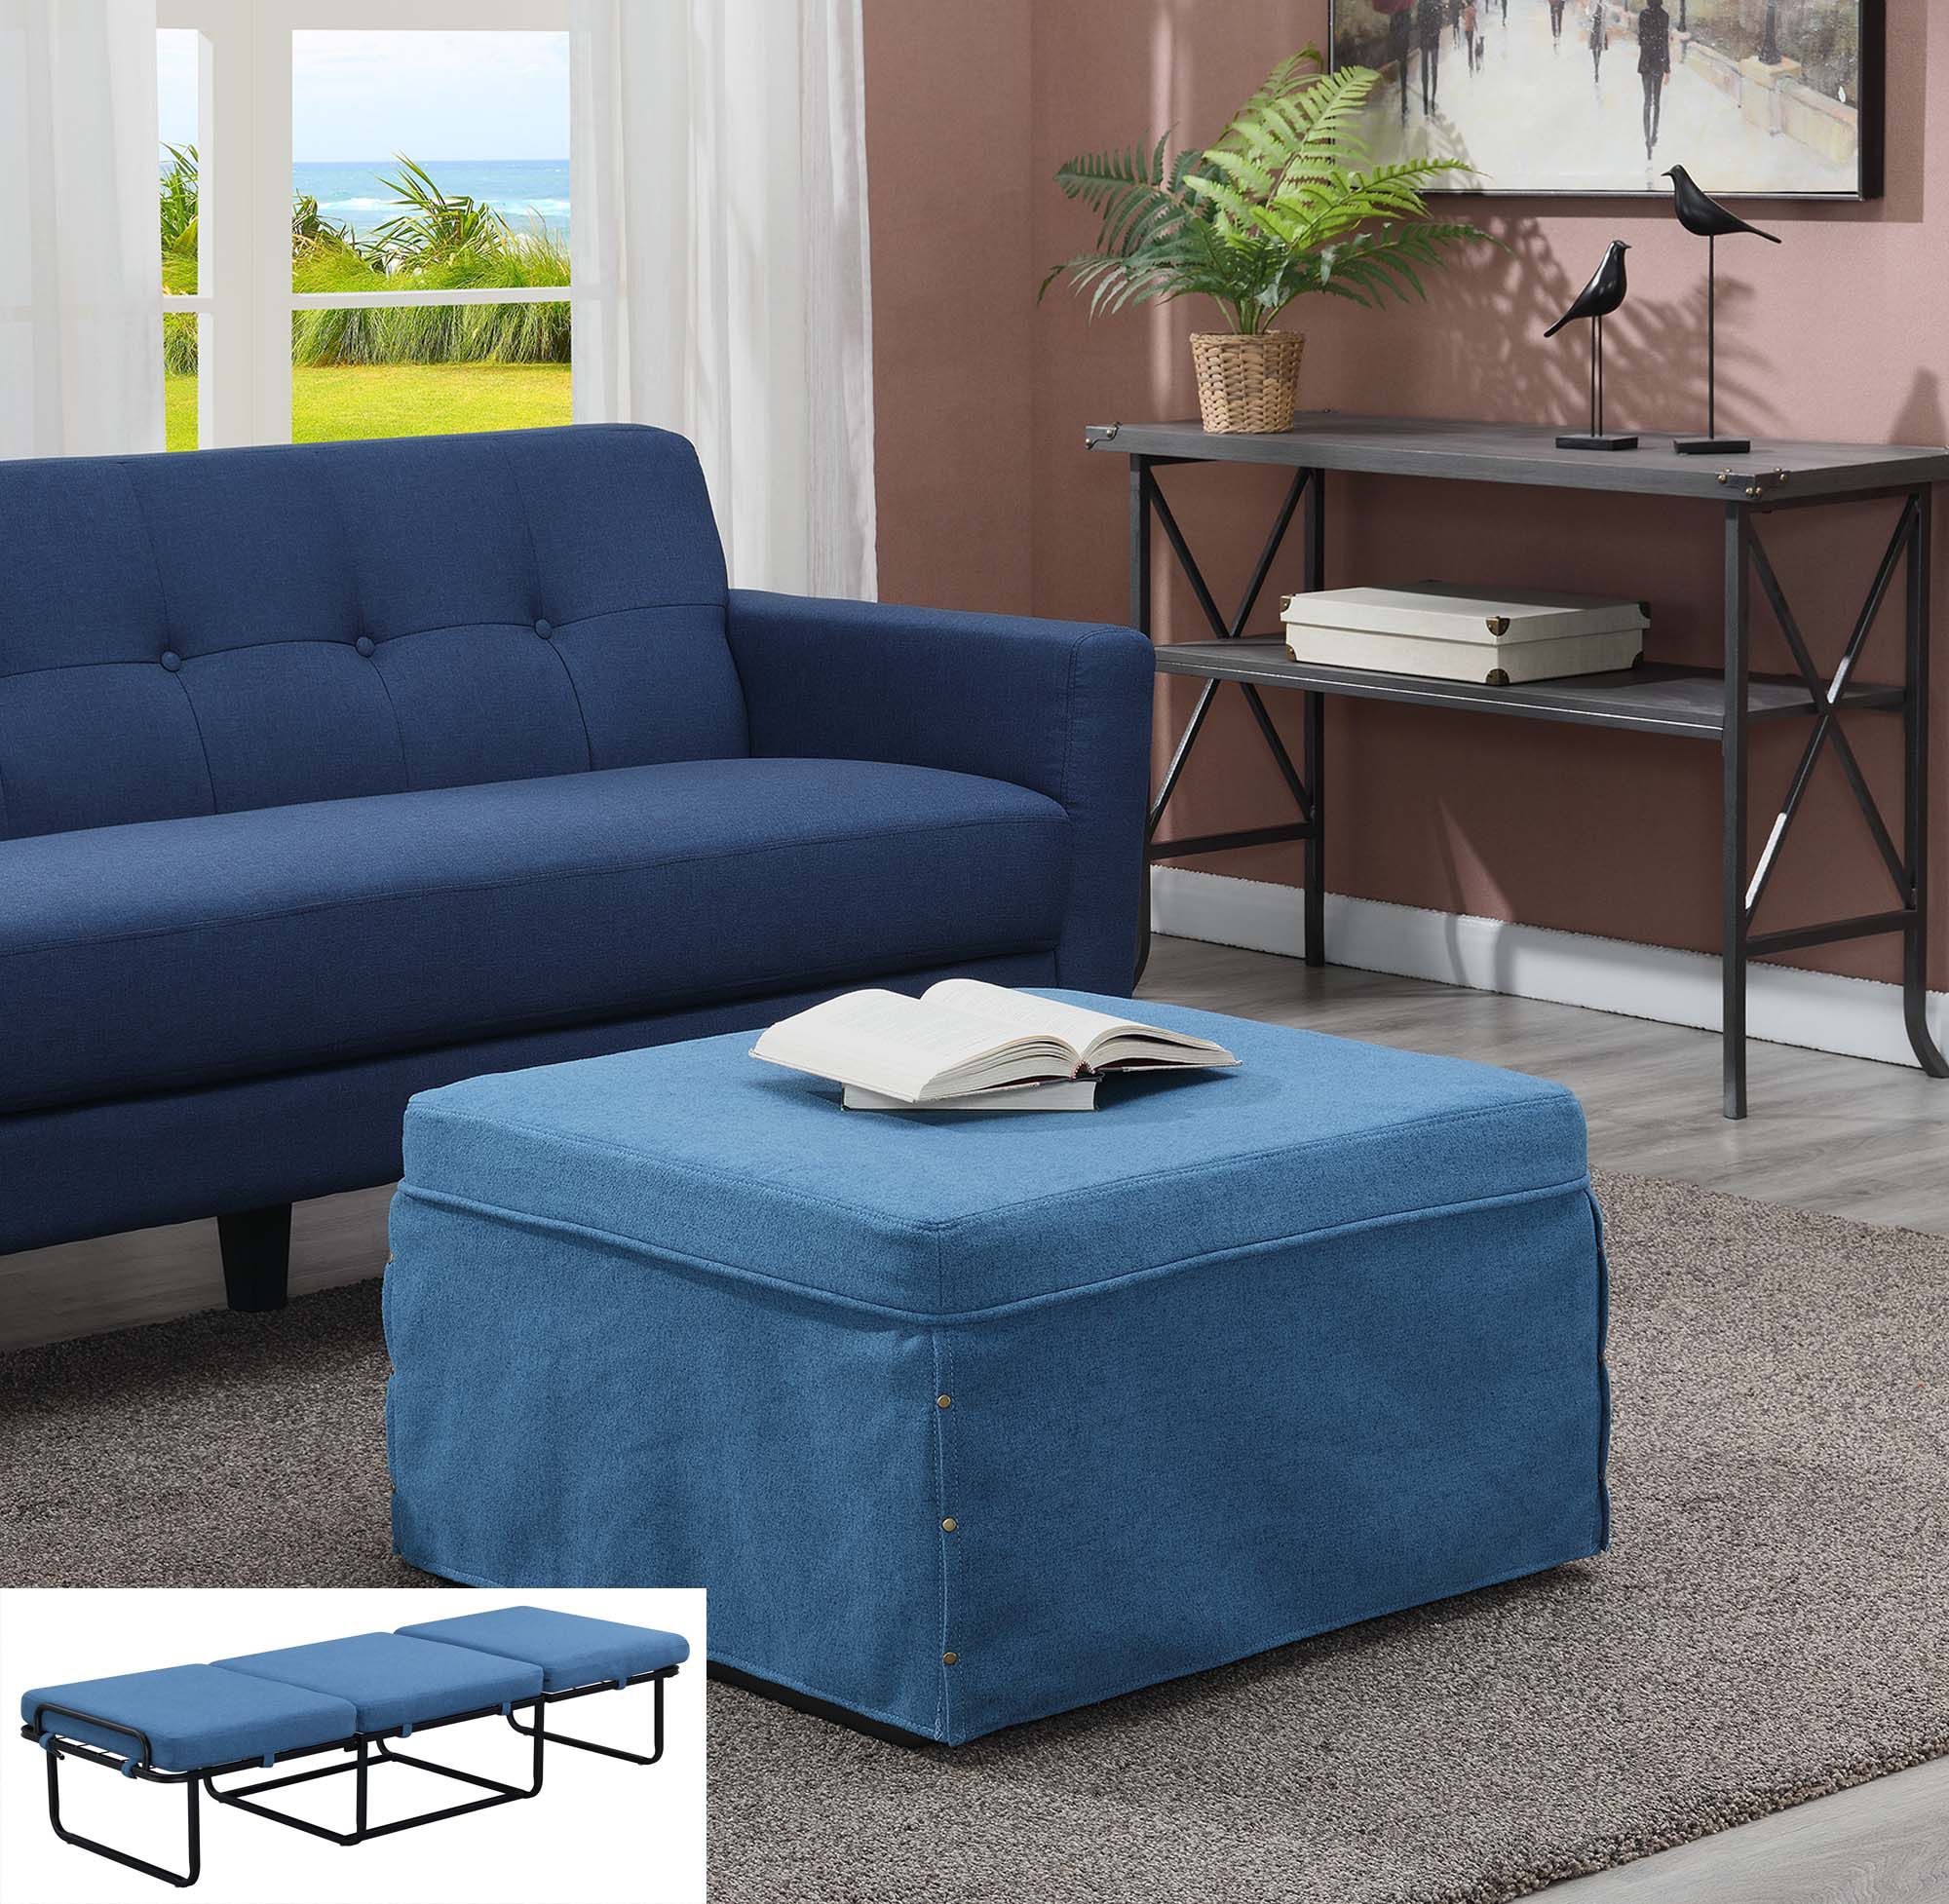 Convenience Concepts Designs4comfort Folding Bed Ottoman, Soft Blue Fabric  – Walmart Throughout Blue Folding Bed Ottomans (View 2 of 15)